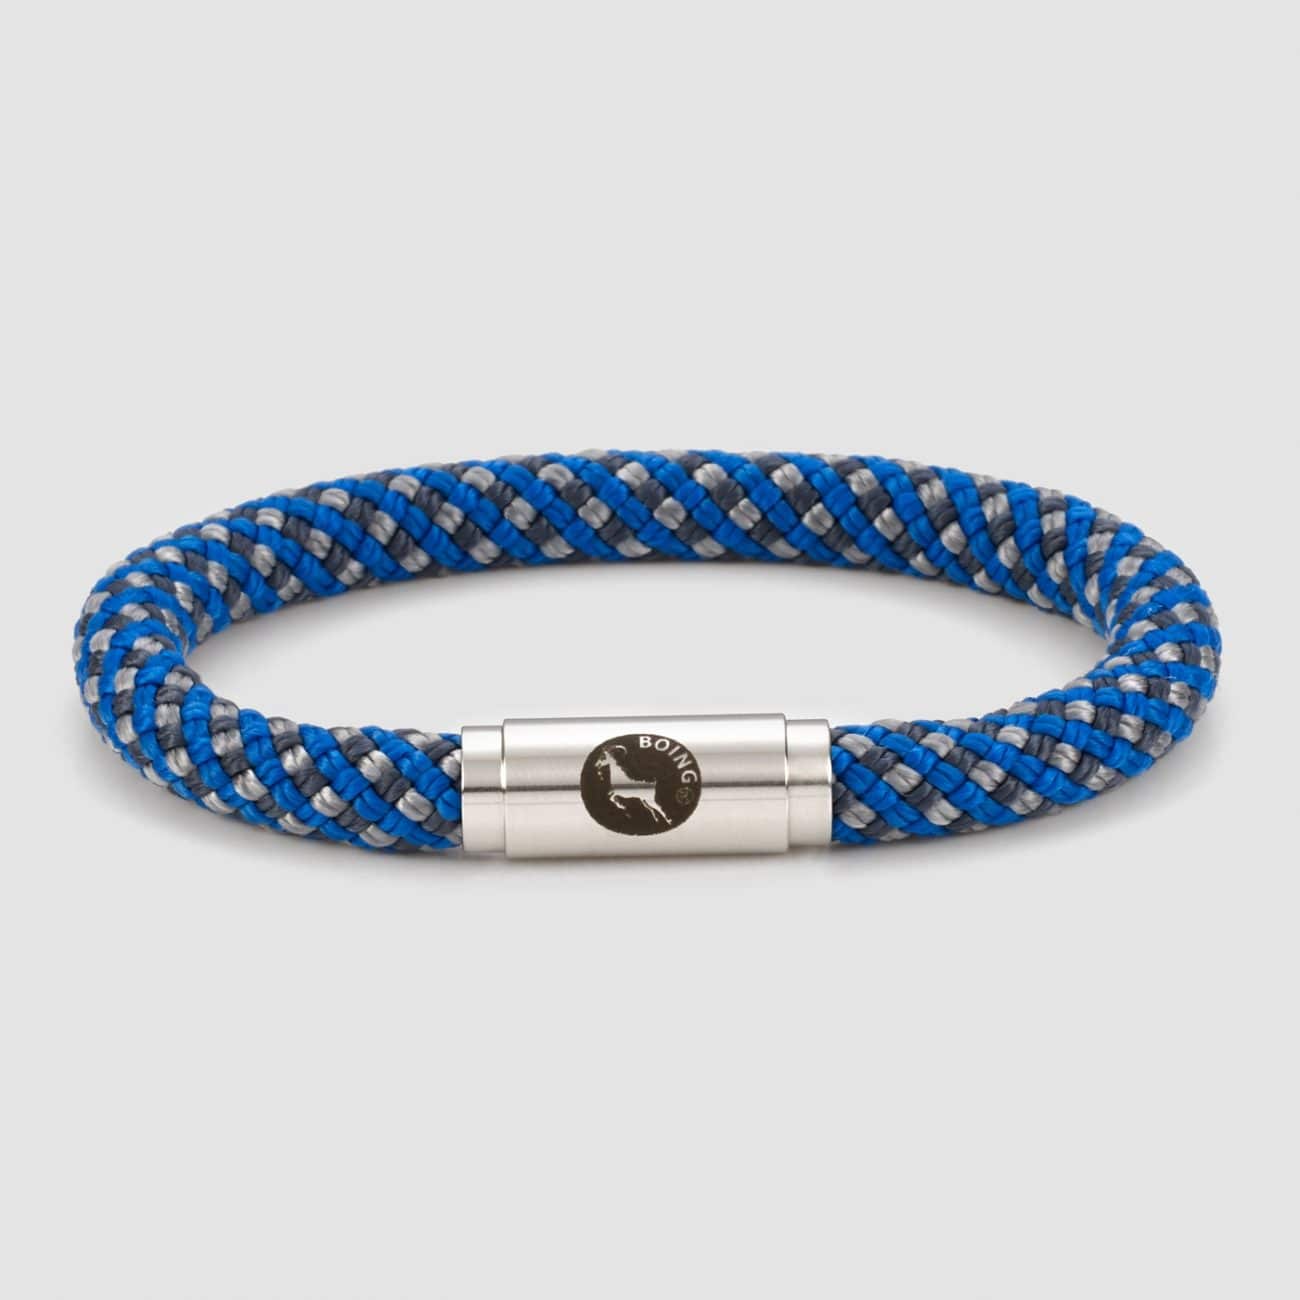 Blue and grey climbing rope bracelet